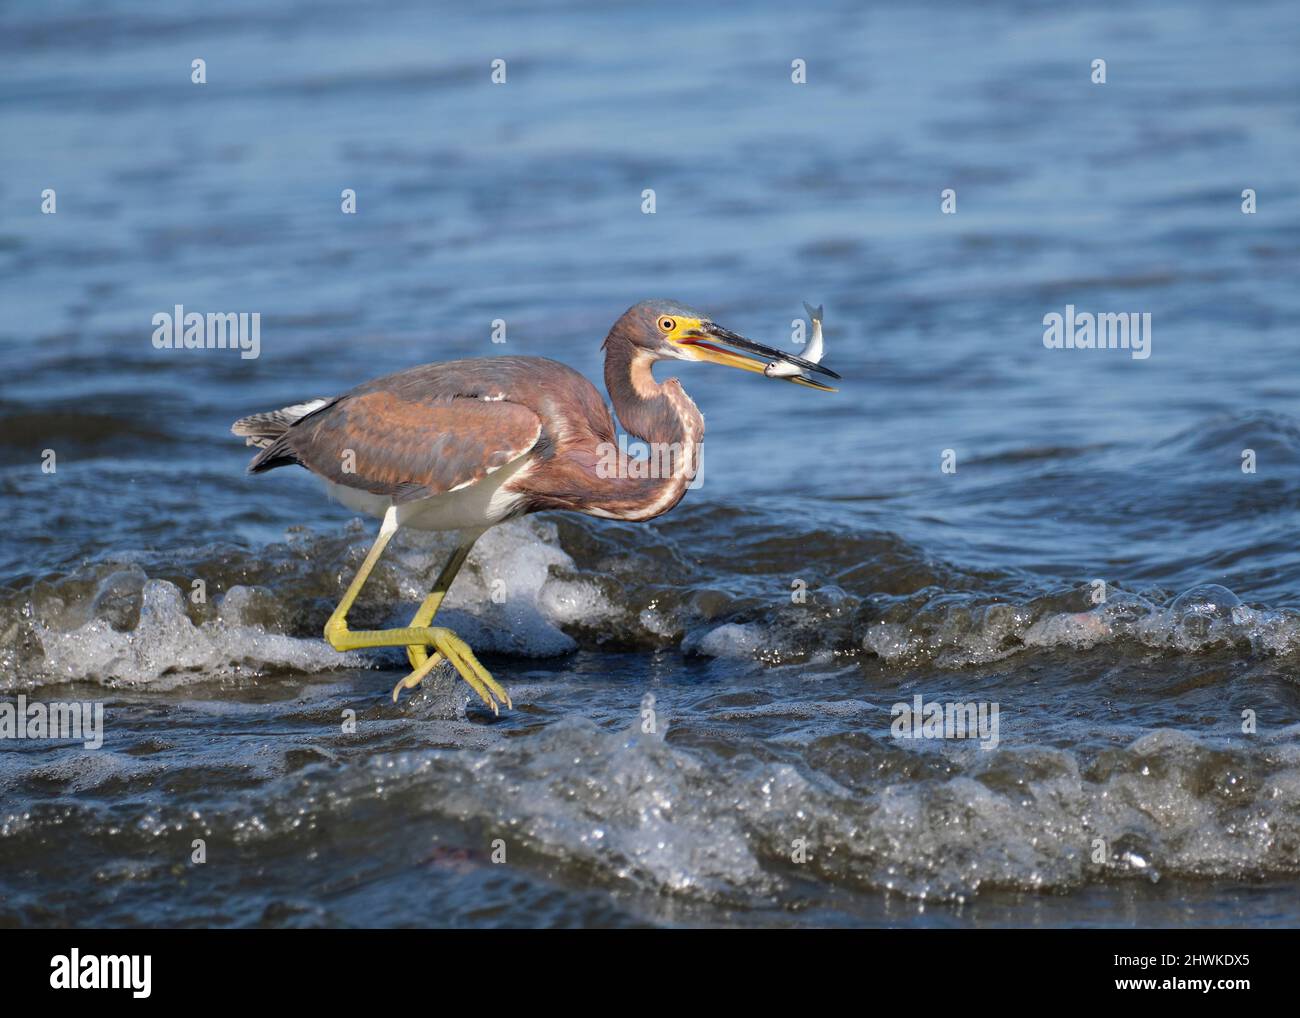 A tricolored heron catches a small silver fish in it's beak along the pacific ocean shore in costa rica. Stock Photo